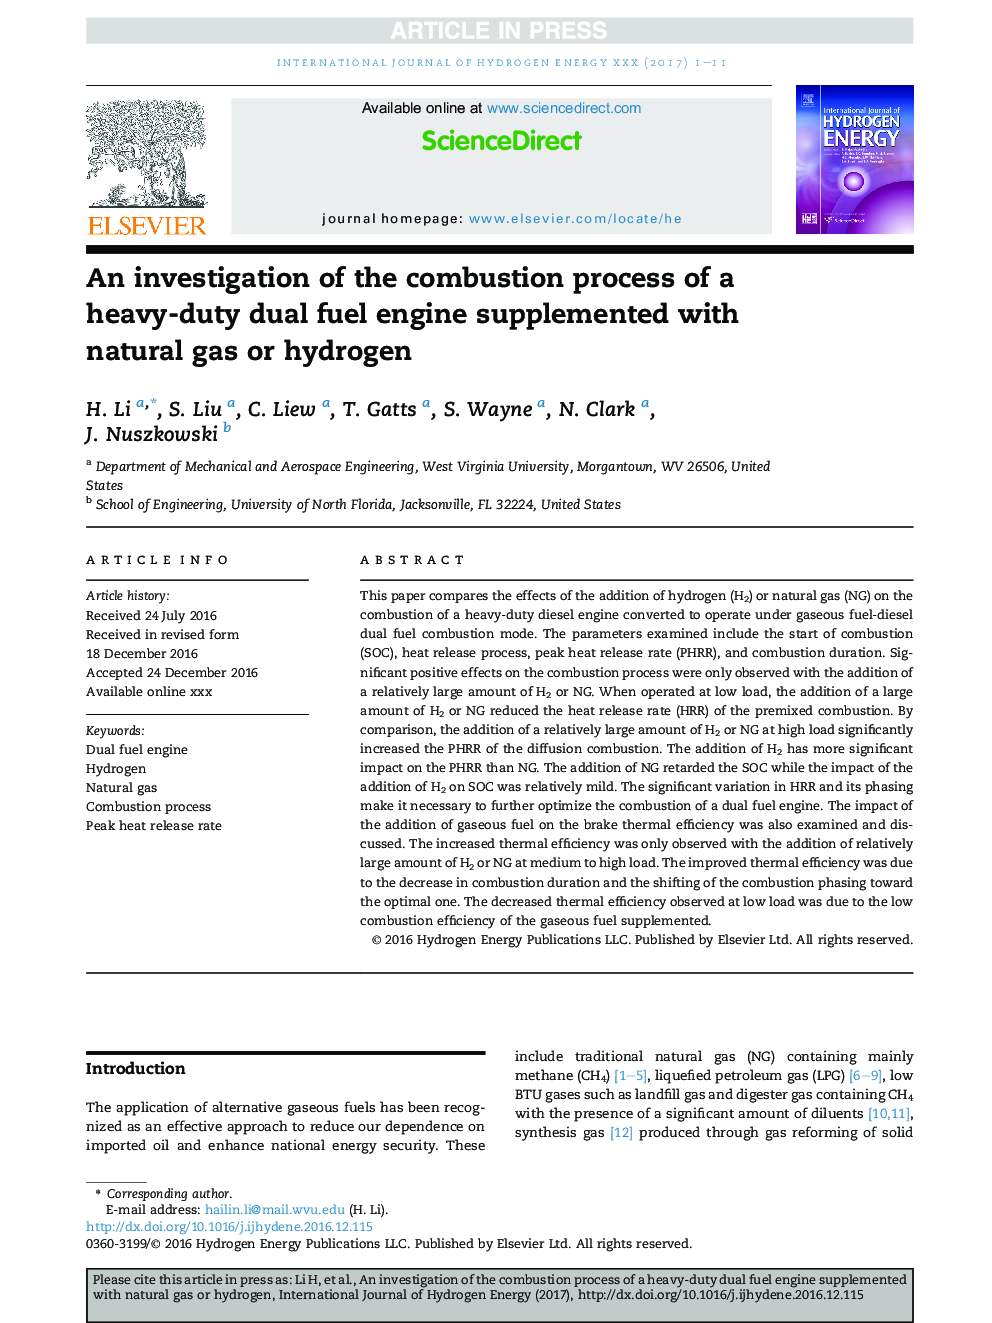 An investigation of the combustion process of a heavy-duty dual fuel engine supplemented with natural gas or hydrogen